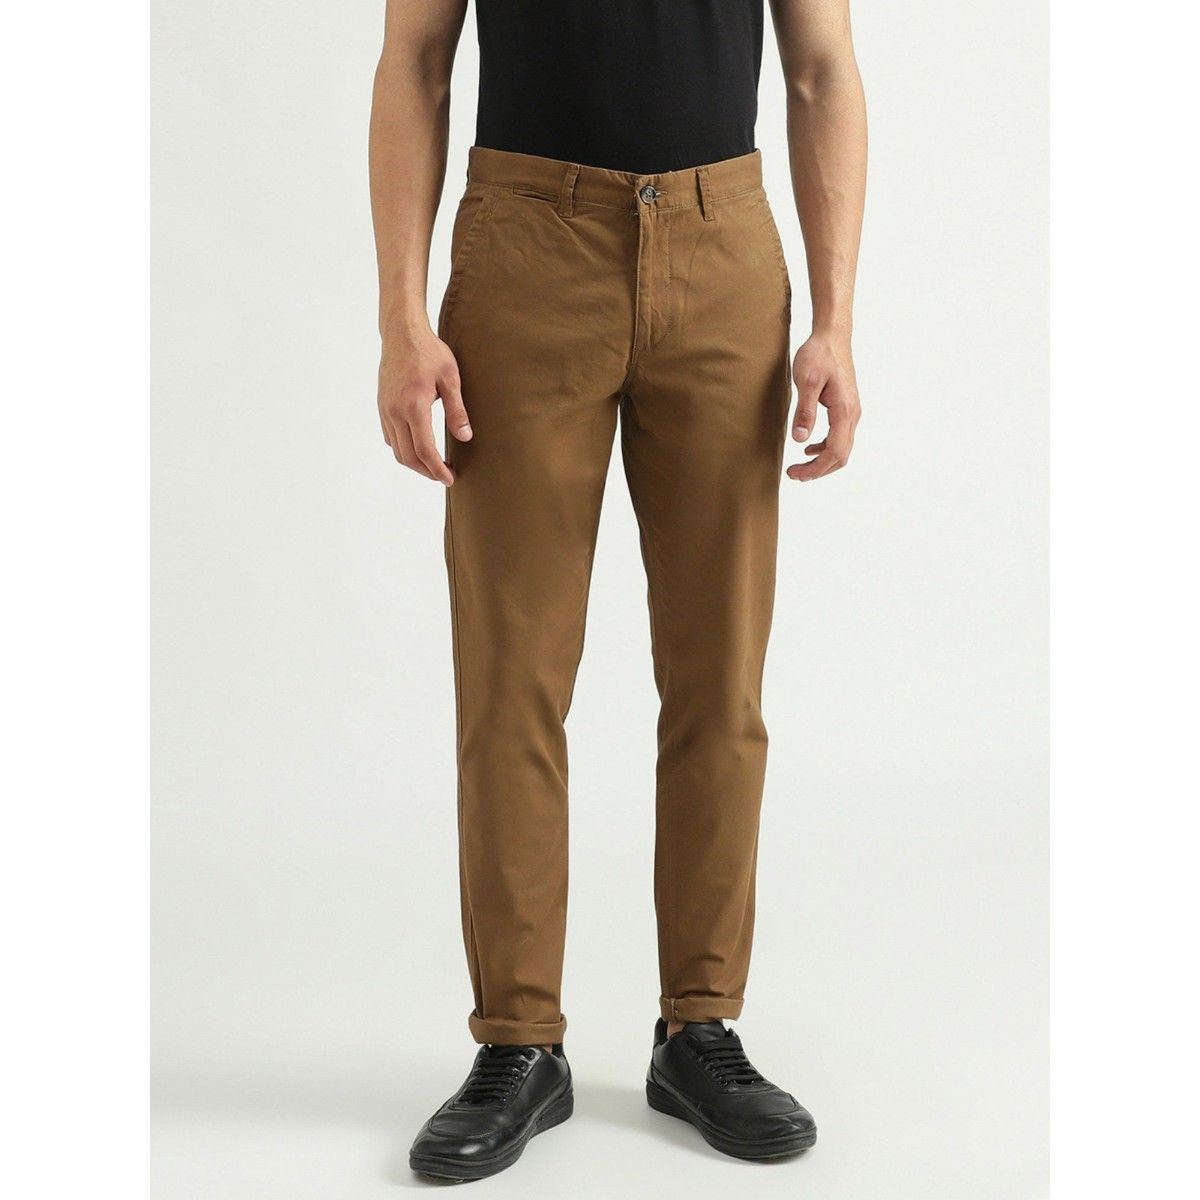 United Colors of Benetton Slim Fit Men Grey Trousers - Buy United Colors of  Benetton Slim Fit Men Grey Trousers Online at Best Prices in India |  Flipkart.com